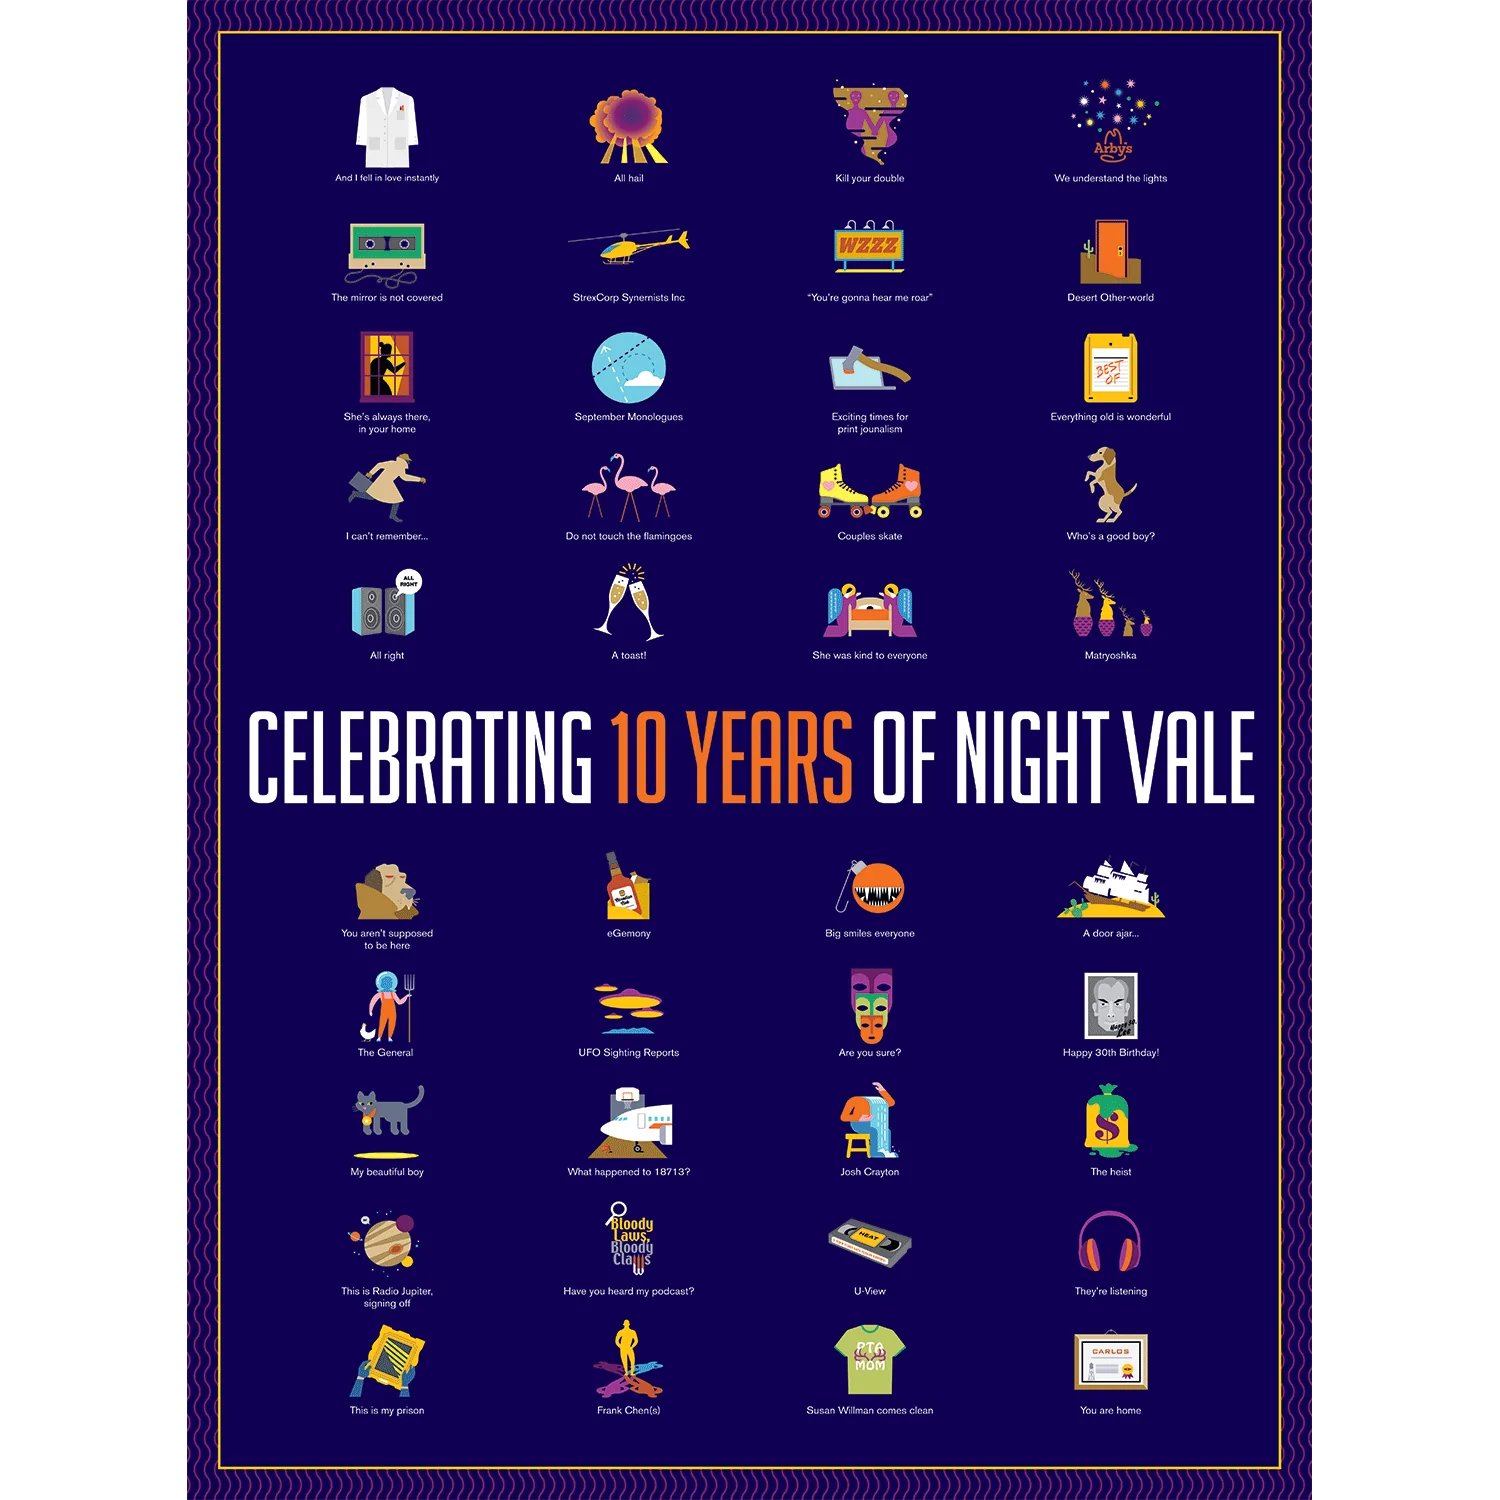 Poster celebrating 10 years of Night Vale. ON it are 36 minimalist icons and graphics with small descriptions of highlights of the past ten years, in including "Are you sure?" and "Do not touch the flamingoes".